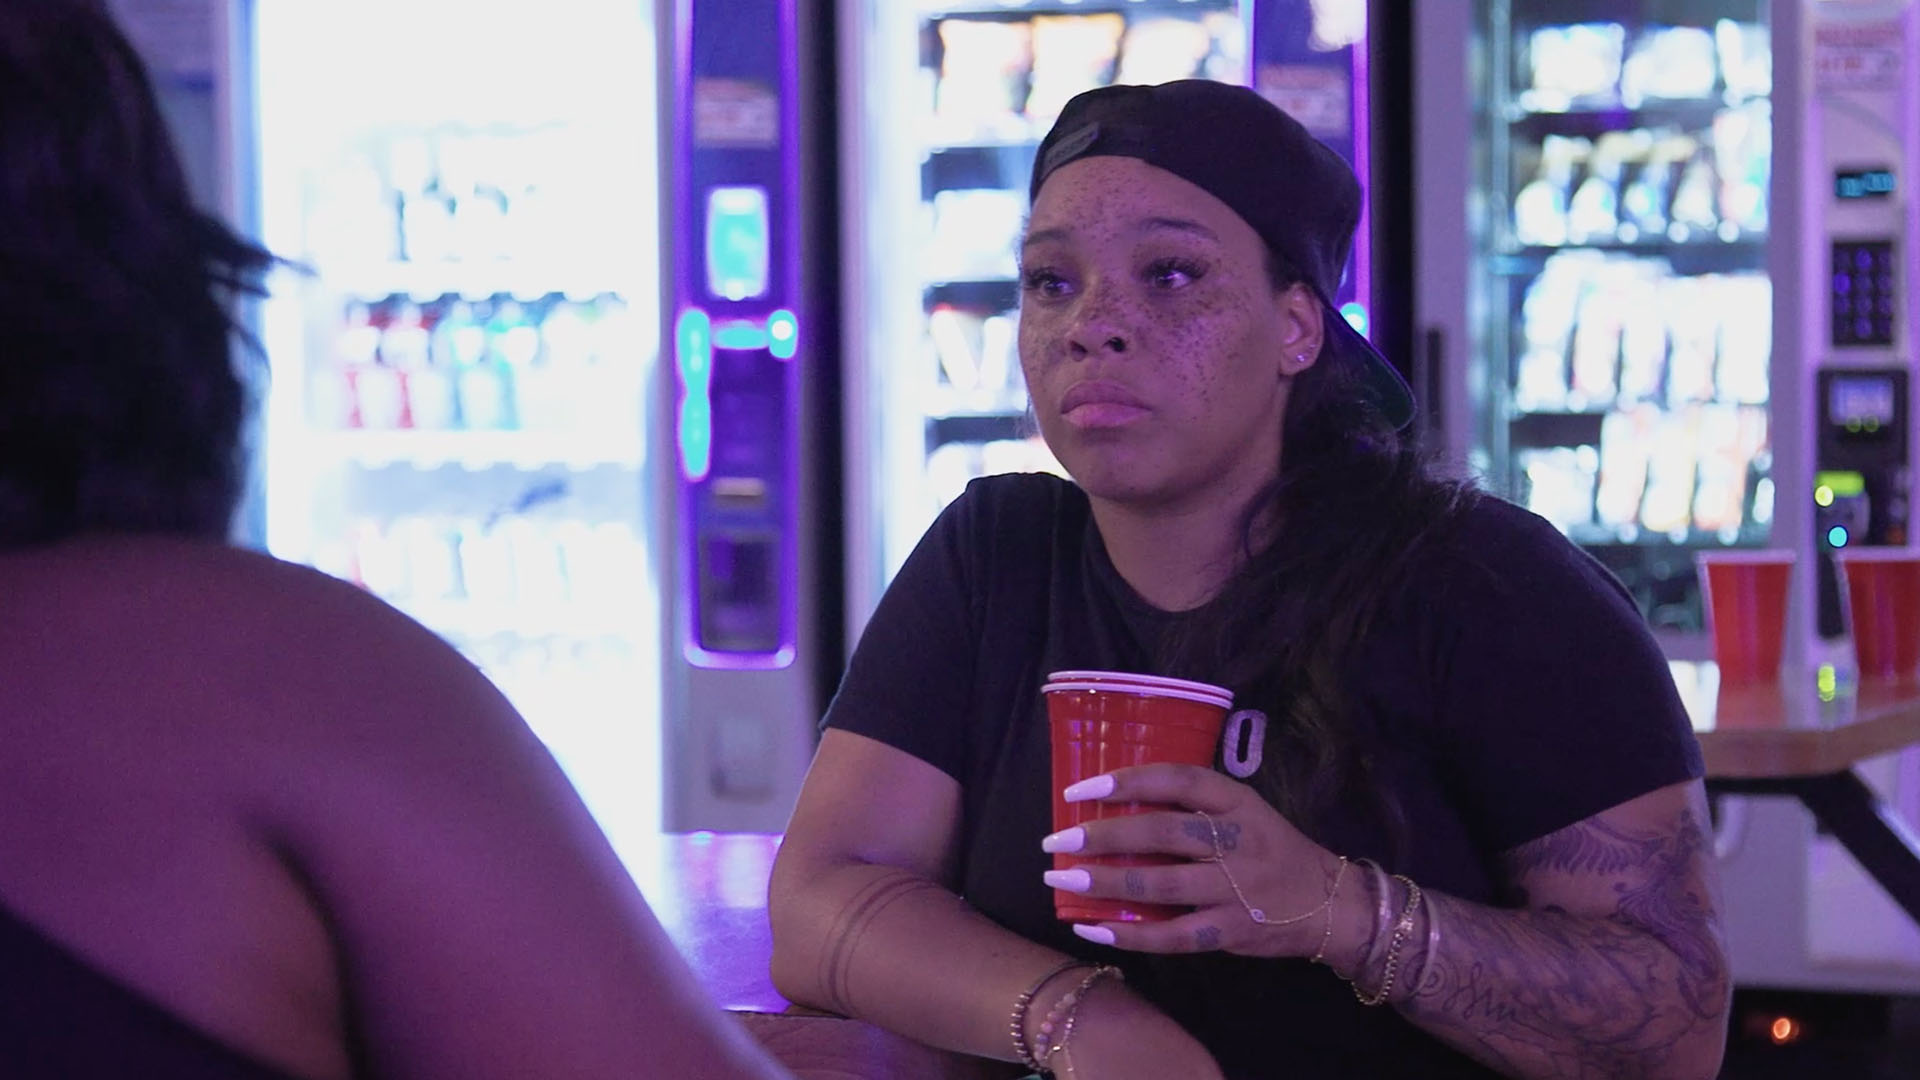 Watch Sneak Peek: Briana Comes Face-to-Face With Cree | Growing Up Hip Hop Video Extras